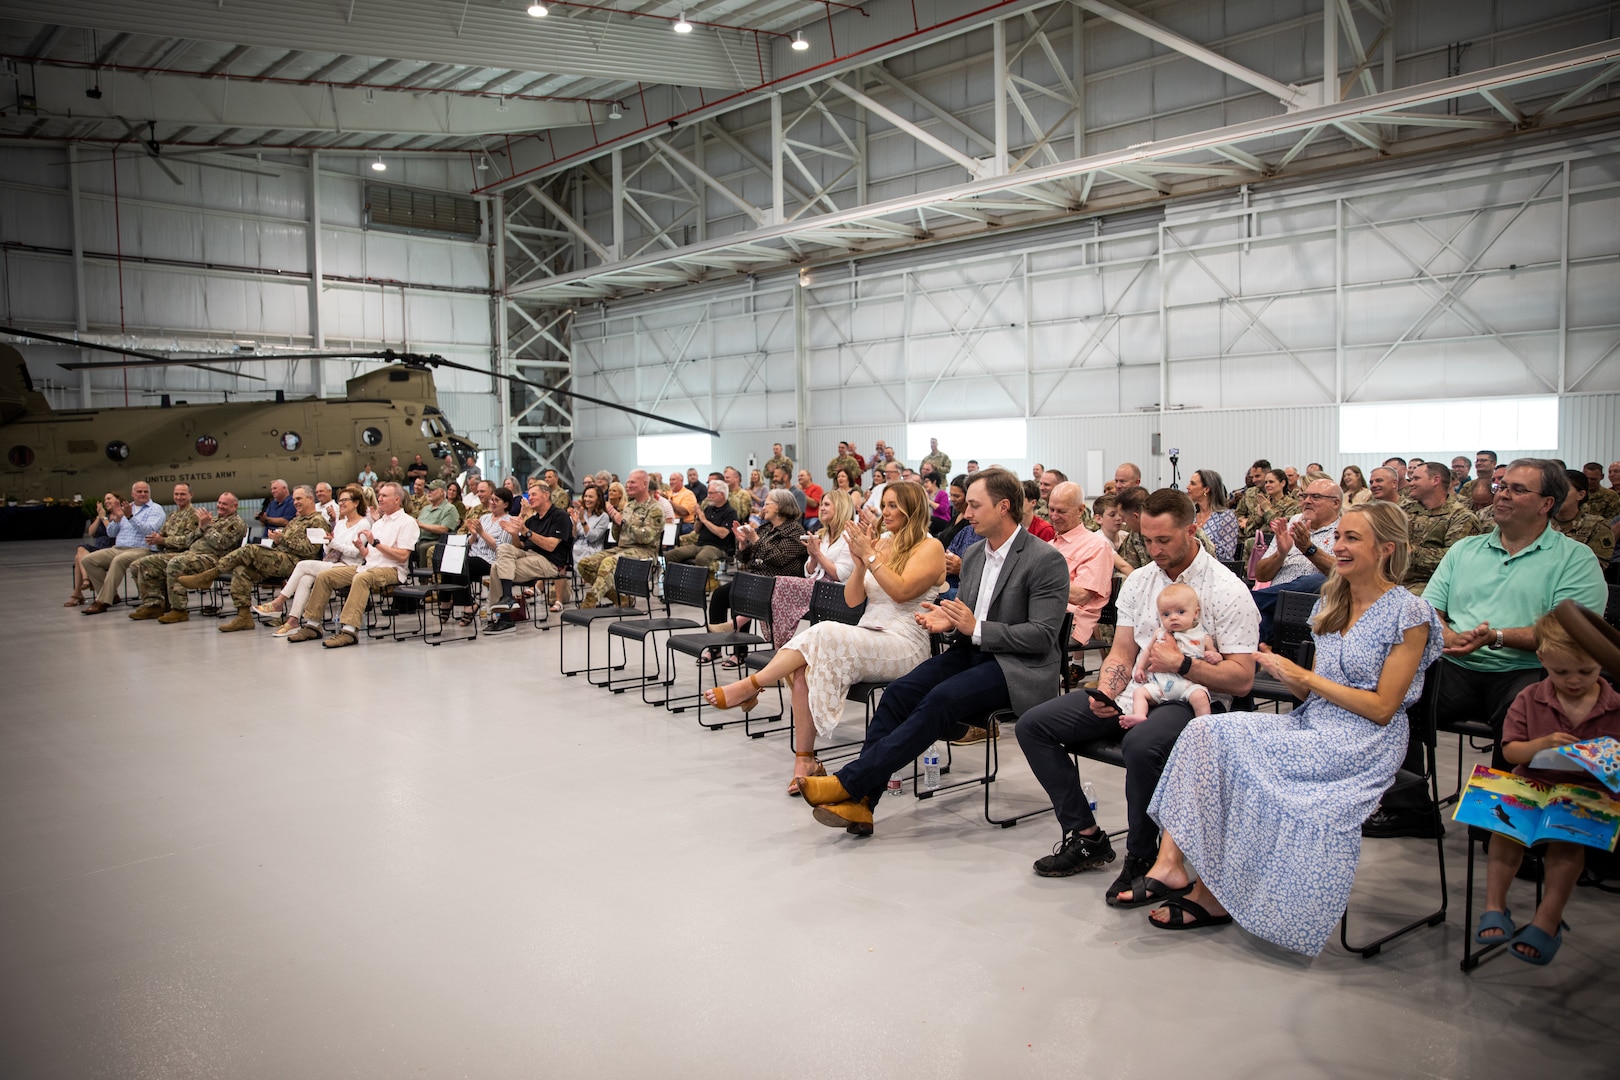 Audience members applaud during the retirement ceremony of Brig. Gen. Jon Harrison, former assistant adjutant general for Oklahoma, at the Army Aviation Support Facility in Lexington, Oklahoma, May 6, 2023. Harrison built a distinguished career over the course of 39 years and earned many awards for his service, including the Legion of Merit and Bronze Star Medal. (Oklahoma National Guard photo by Spc. Danielle Rayon)